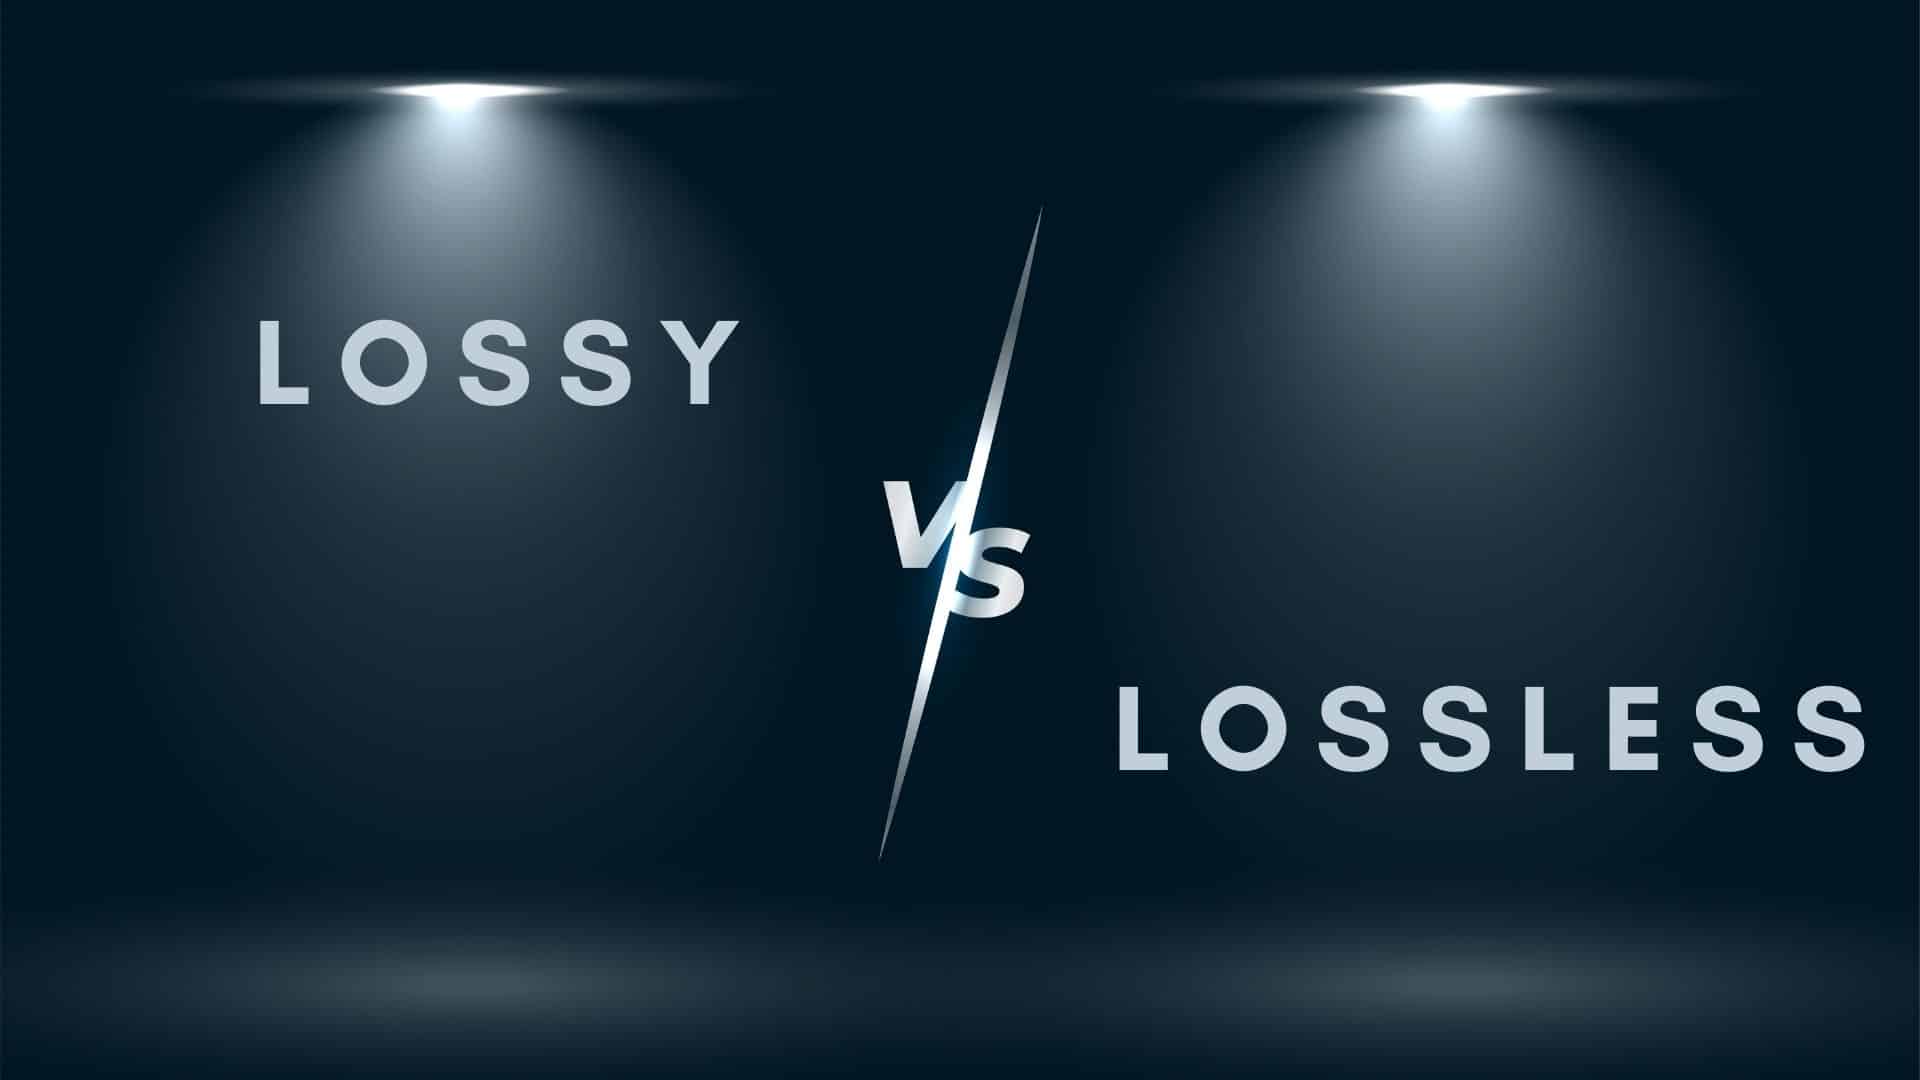 What's the Difference Between Lossy and Lossless Compression